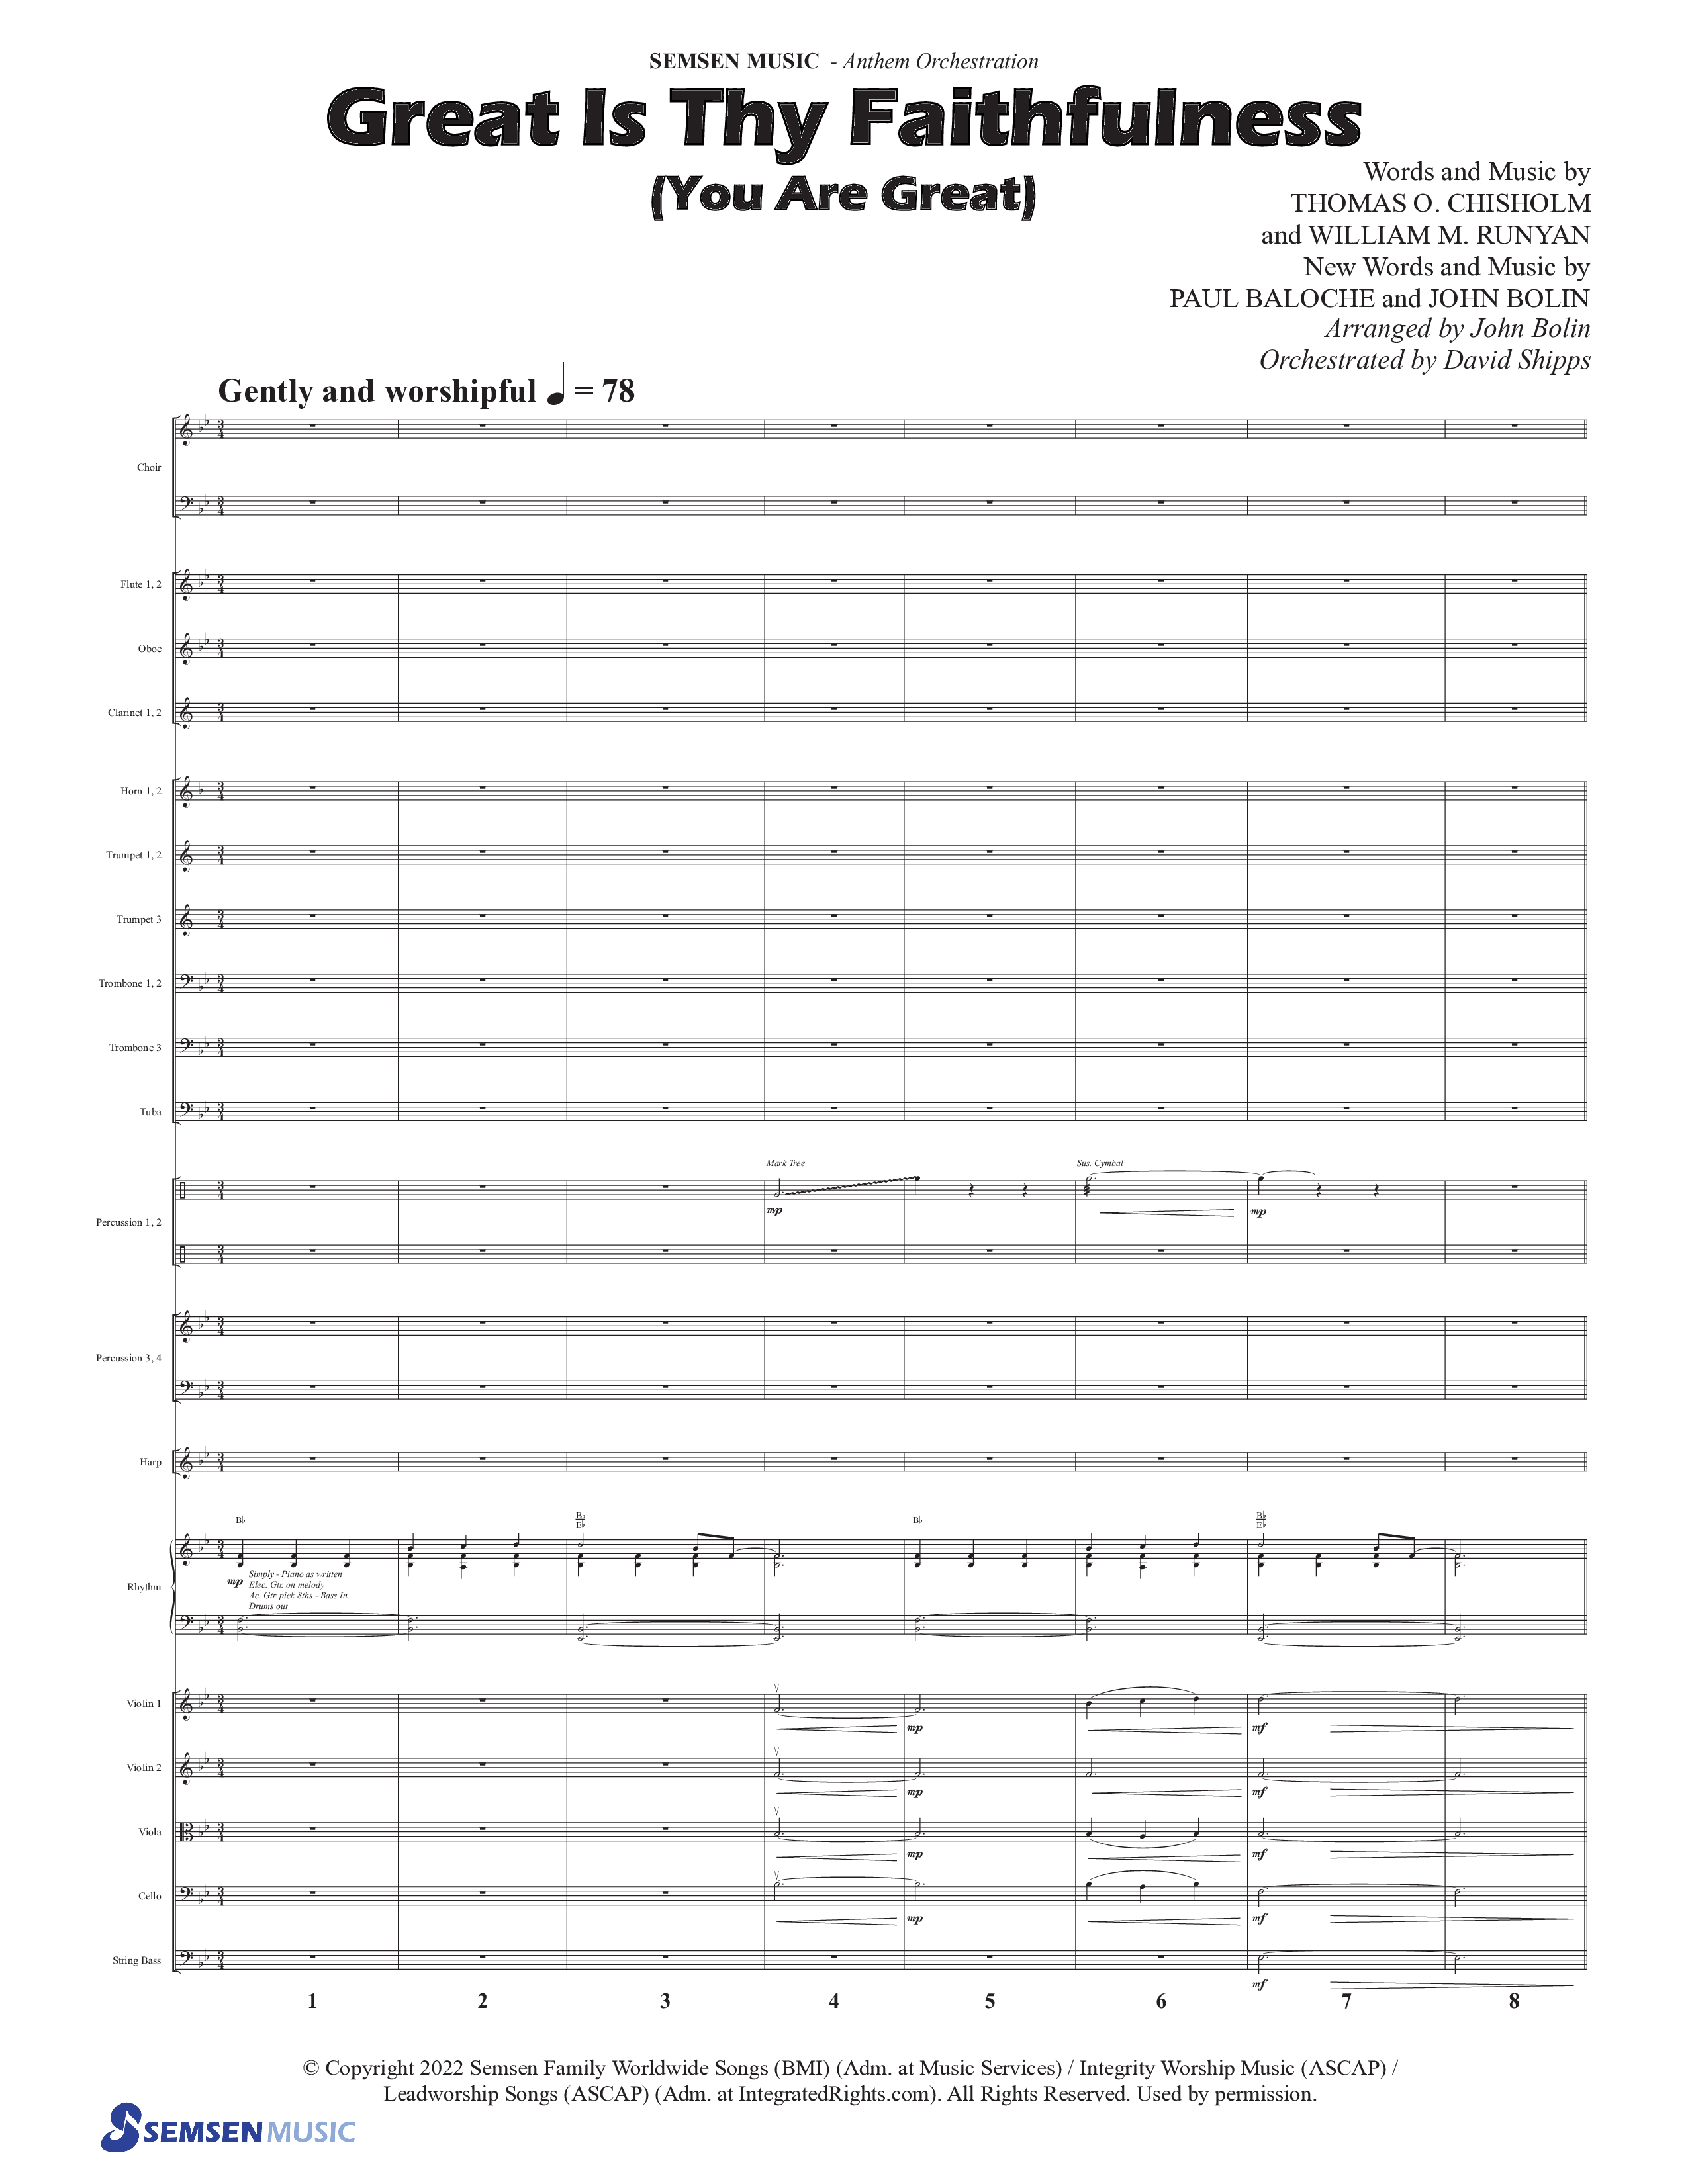 Great Is Thy Faithfulness (You Are Great) (Choral Anthem SATB) Orchestration (Semsen Music / Arr. John Bolin / Orch. David Shipps)